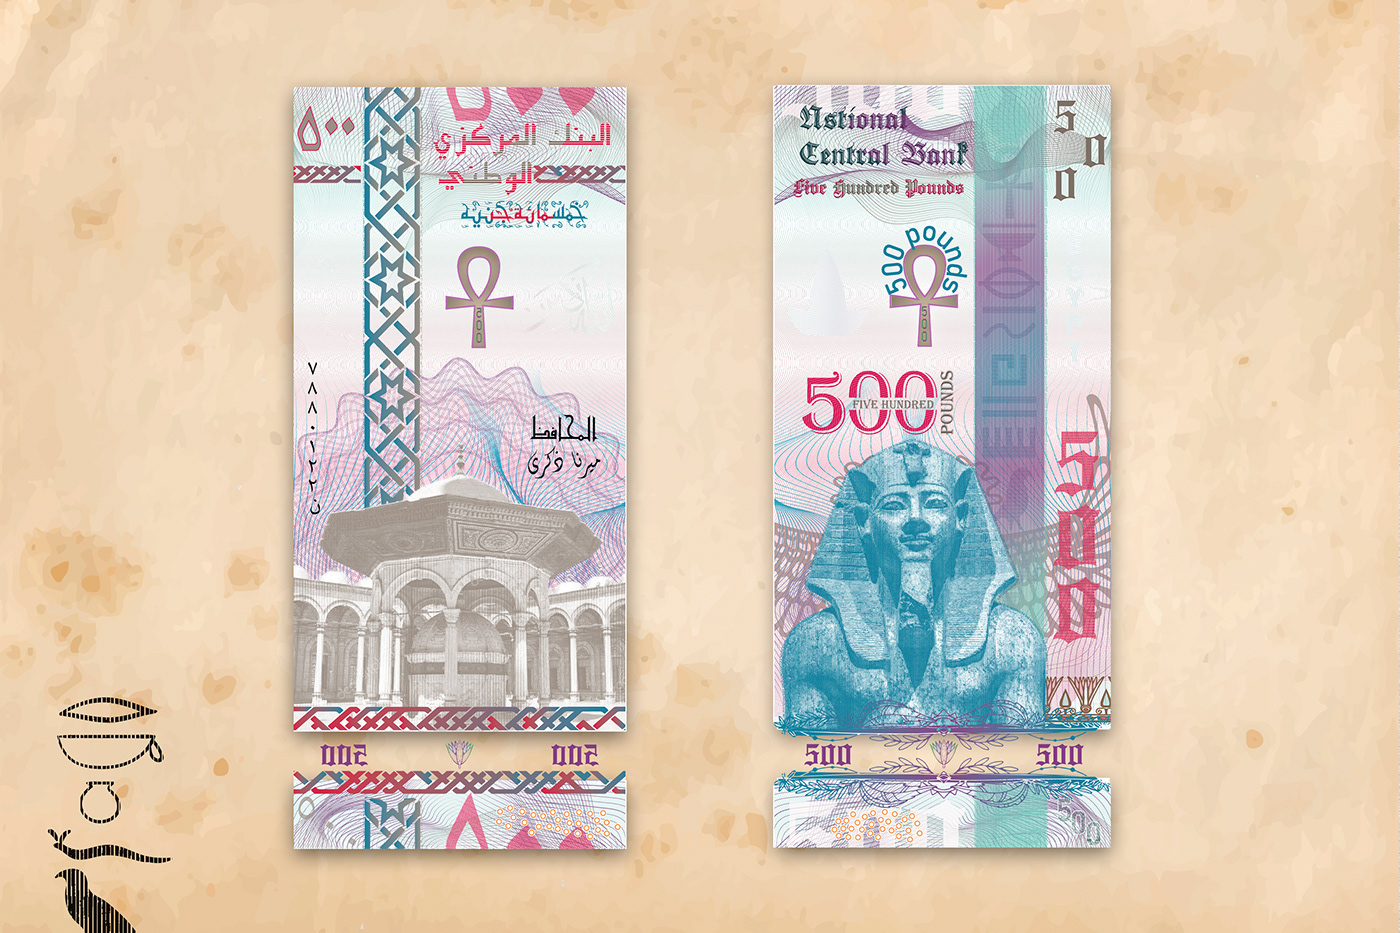 currency money banknote design currency design egypt guilloche Modern Money polymer banknotes security features security printing